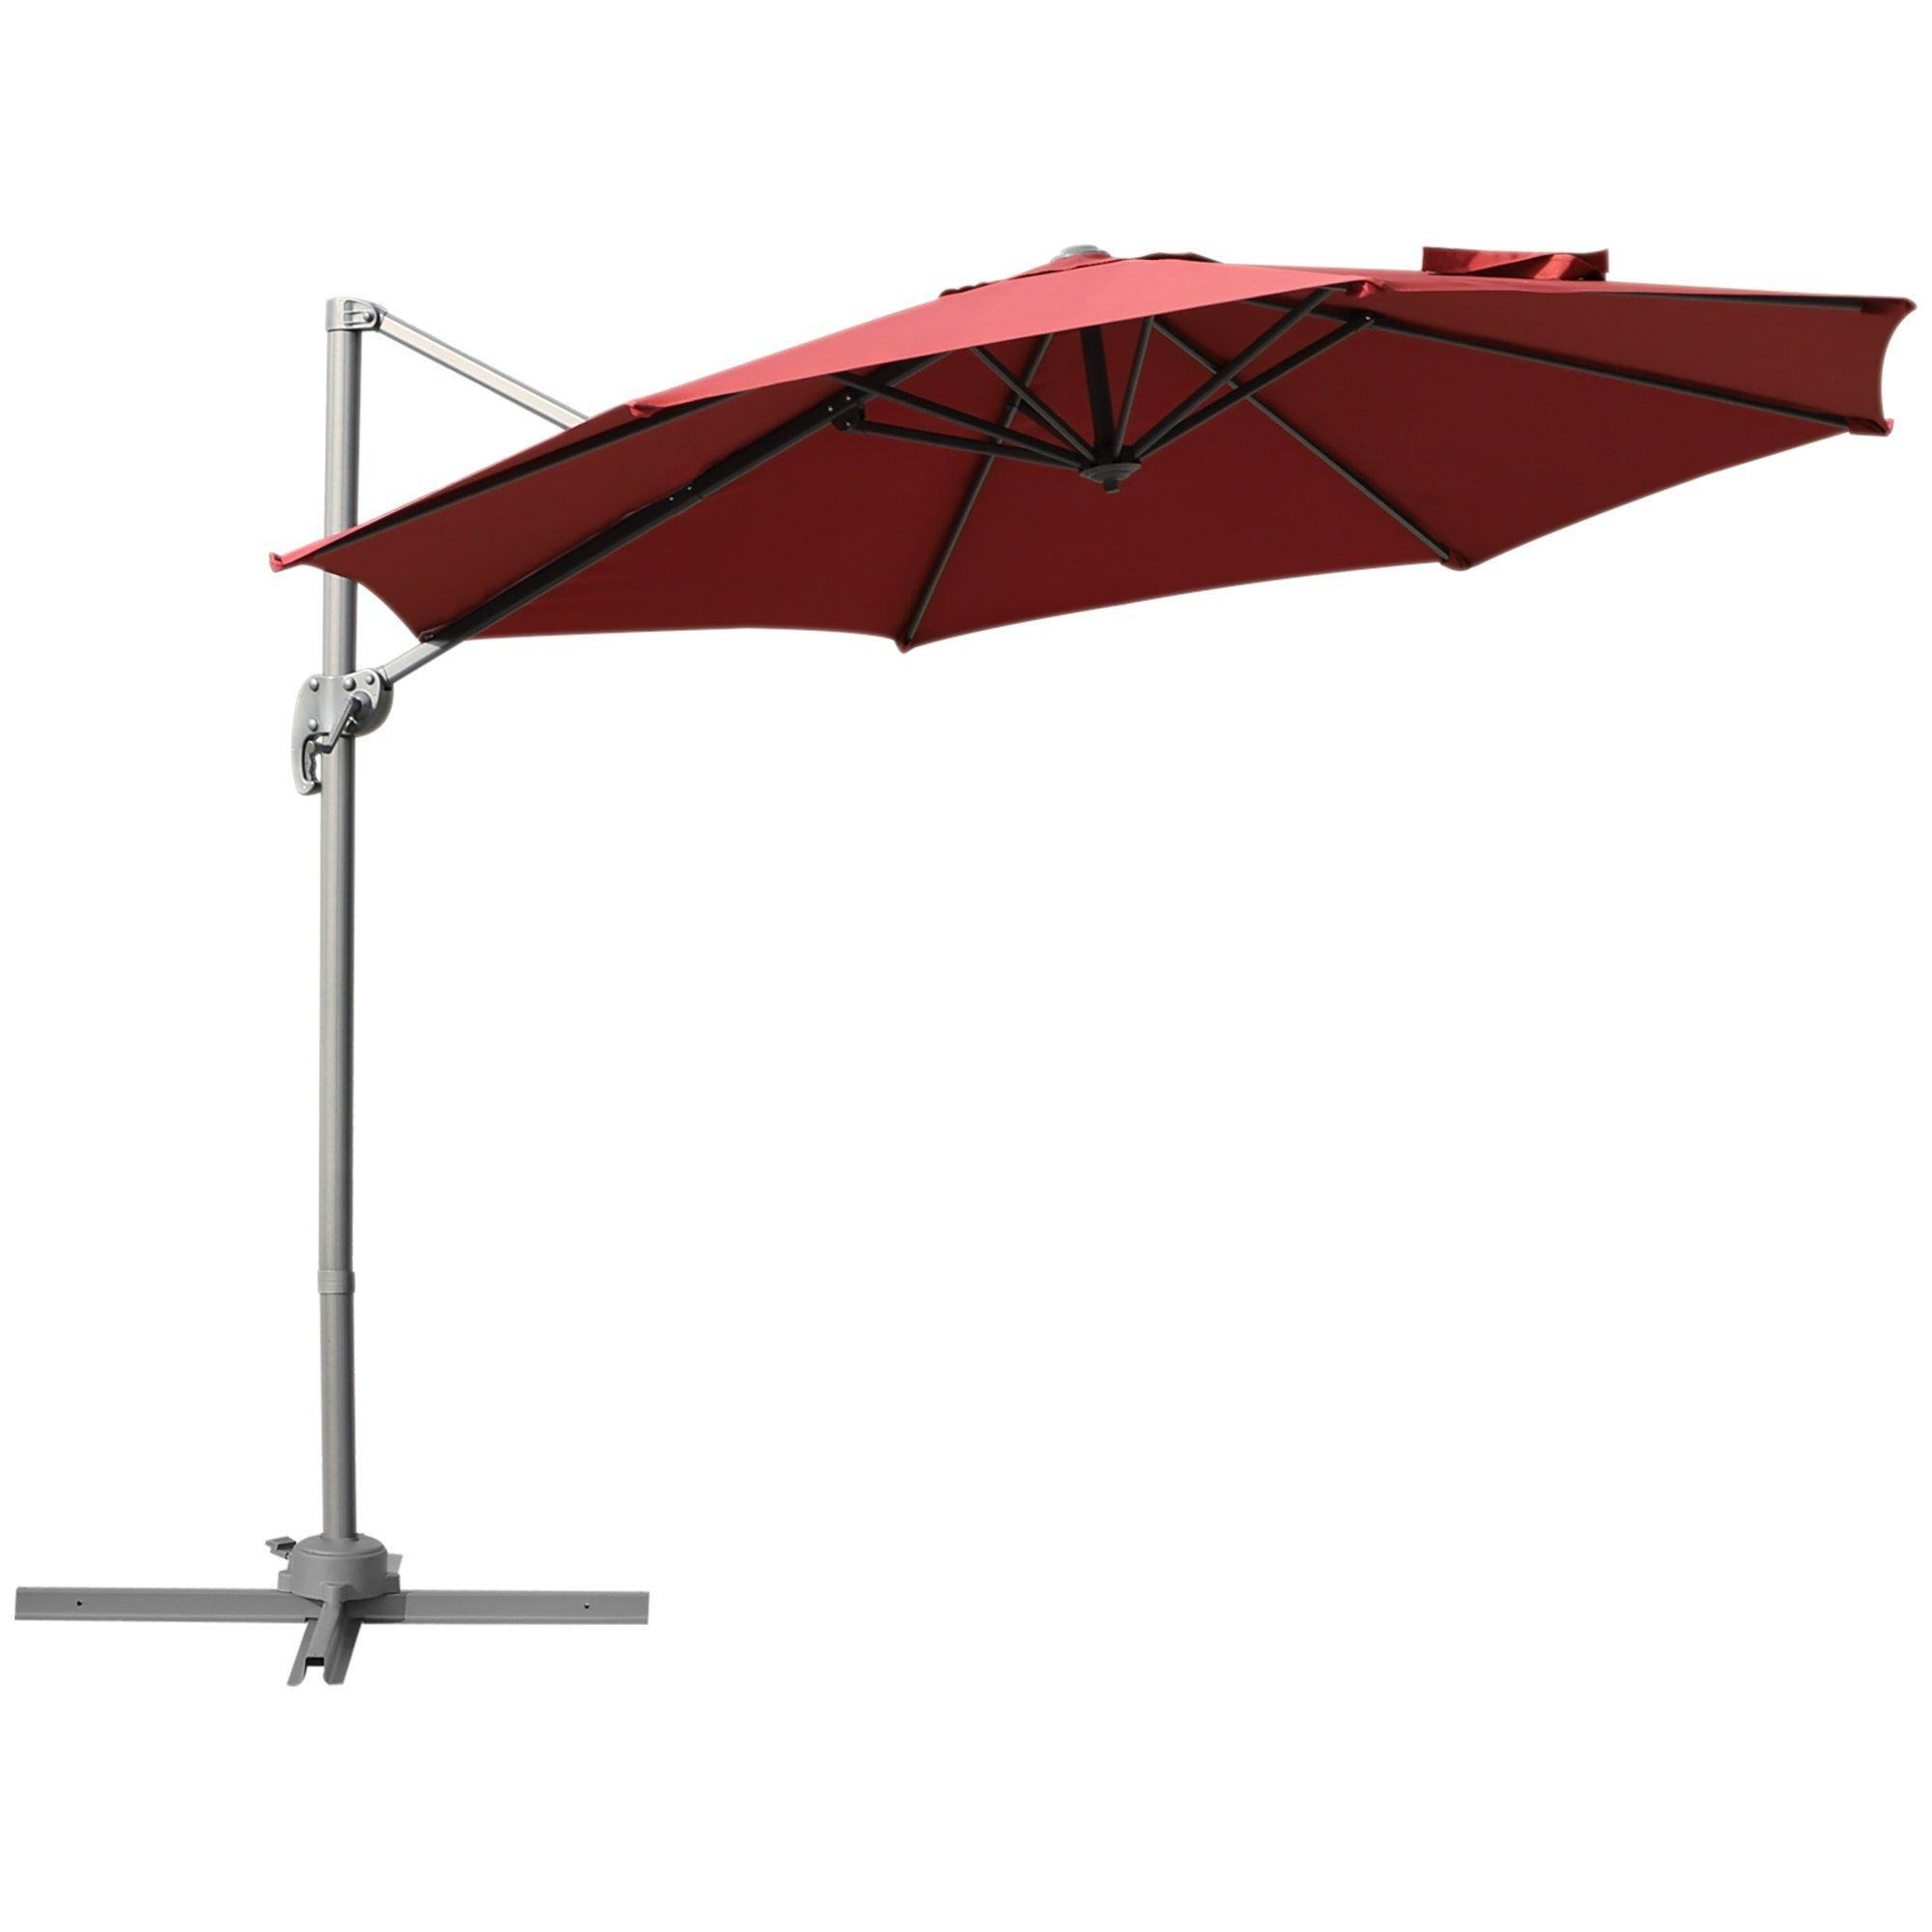 Cantilever Roma Parasol 360Degree Rotation with Hand Crank and Base - image 1